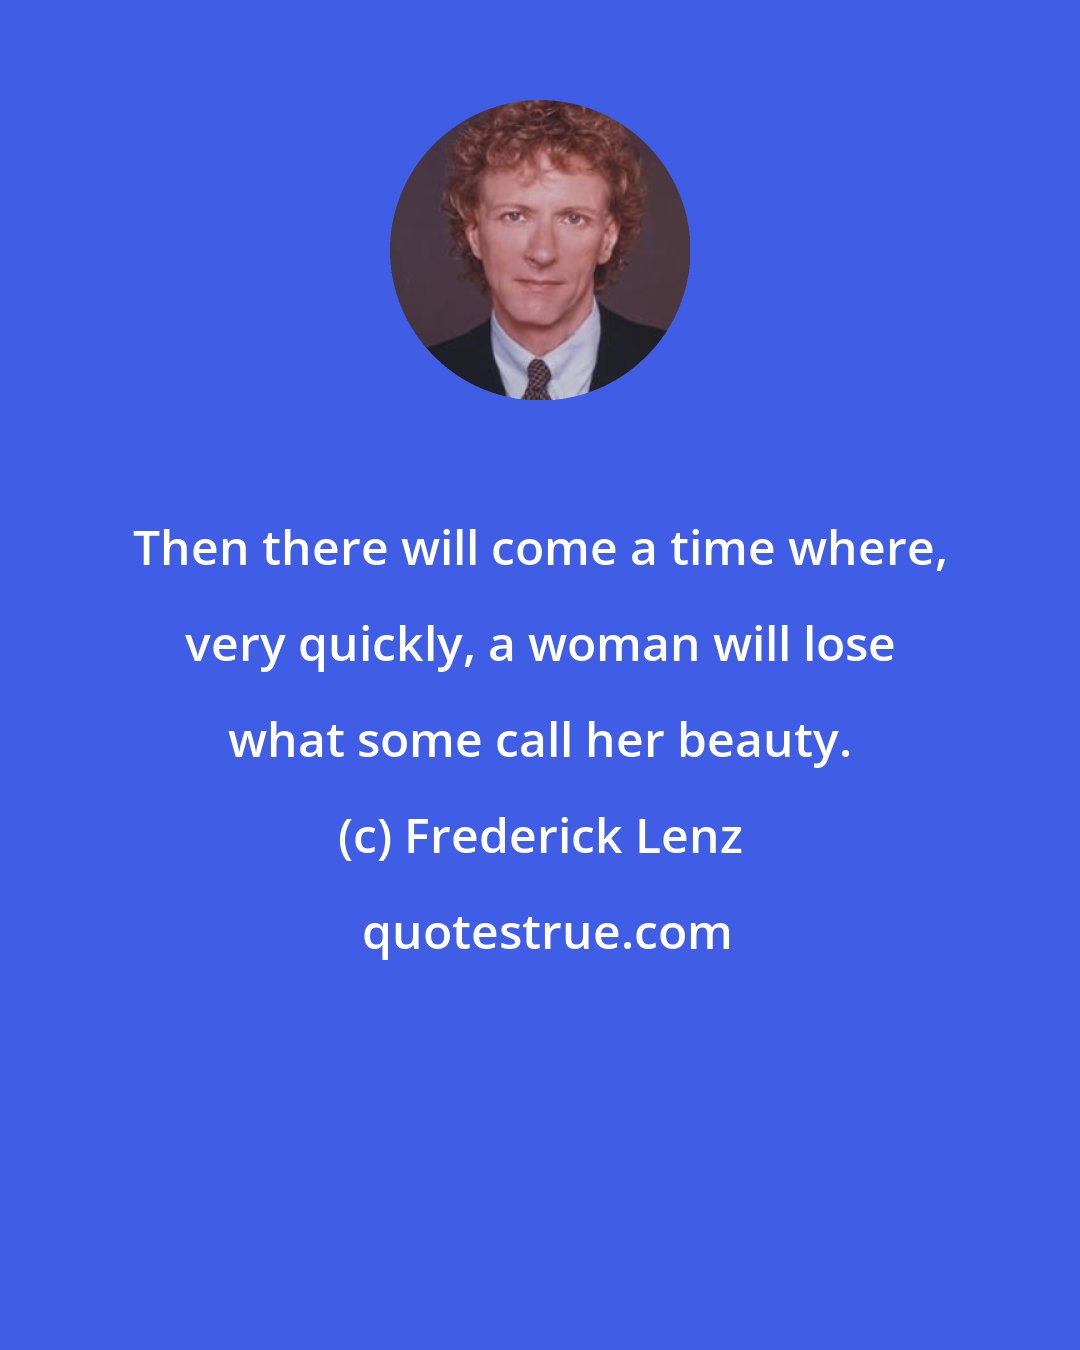 Frederick Lenz: Then there will come a time where, very quickly, a woman will lose what some call her beauty.